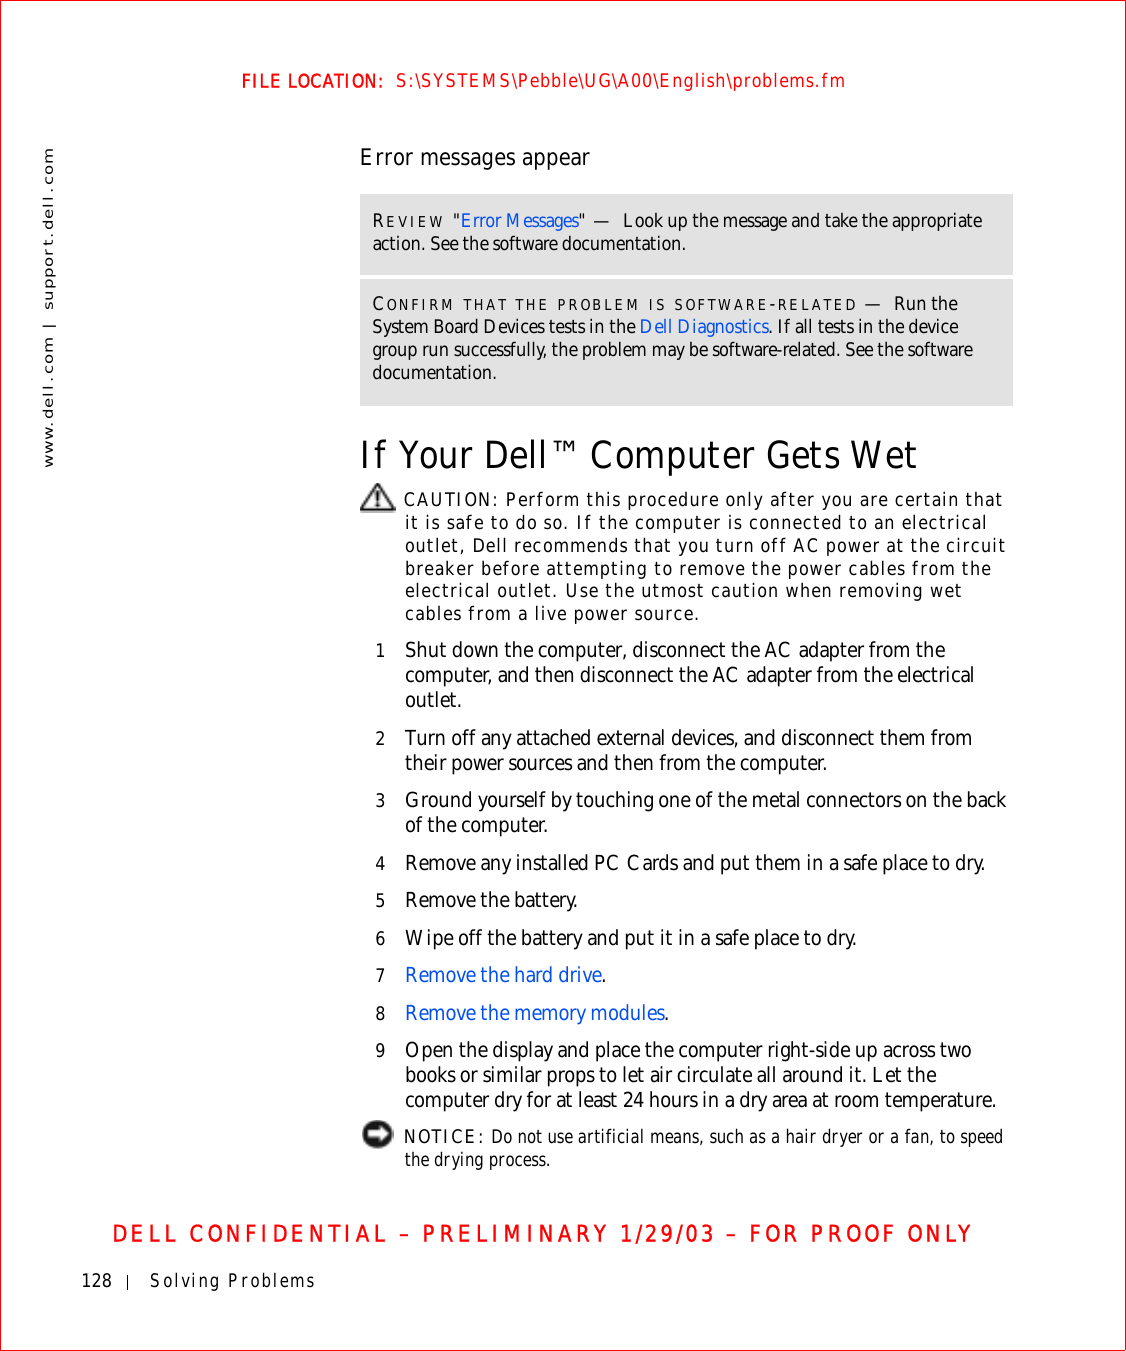 128 Solving Problemswww.dell.com | support.dell.comFILE LOCATION:  S:\SYSTEMS\Pebble\UG\A00\English\problems.fmDELL CONFIDENTIAL – PRELIMINARY 1/29/03 – FOR PROOF ONLYError messages appearIf Your Dell™ Computer Gets Wet CAUTION: Perform this procedure only after you are certain that it is safe to do so. If the computer is connected to an electrical outlet, Dell recommends that you turn off AC power at the circuit breaker before attempting to remove the power cables from the electrical outlet. Use the utmost caution when removing wet cables from a live power source.1Shut down the computer, disconnect the AC adapter from the computer, and then disconnect the AC adapter from the electrical outlet.2Turn off any attached external devices, and disconnect them from their power sources and then from the computer.3Ground yourself by touching one of the metal connectors on the back of the computer.4Remove any installed PC Cards and put them in a safe place to dry.5Remove the battery.6Wipe off the battery and put it in a safe place to dry.7Remove the hard drive.8Remove the memory modules.9Open the display and place the computer right-side up across two books or similar props to let air circulate all around it. Let the computer dry for at least 24 hours in a dry area at room temperature. NOTICE: Do not use artificial means, such as a hair dryer or a fan, to speed the drying process. REVIEW &quot;Error Messages&quot;—Look up the message and take the appropriate action. See the software documentation.CONFIRM THAT THE PROBLEM IS SOFTWARE-RELATED —Run the System Board Devices tests in the Dell Diagnostics. If all tests in the device group run successfully, the problem may be software-related. See the software documentation.